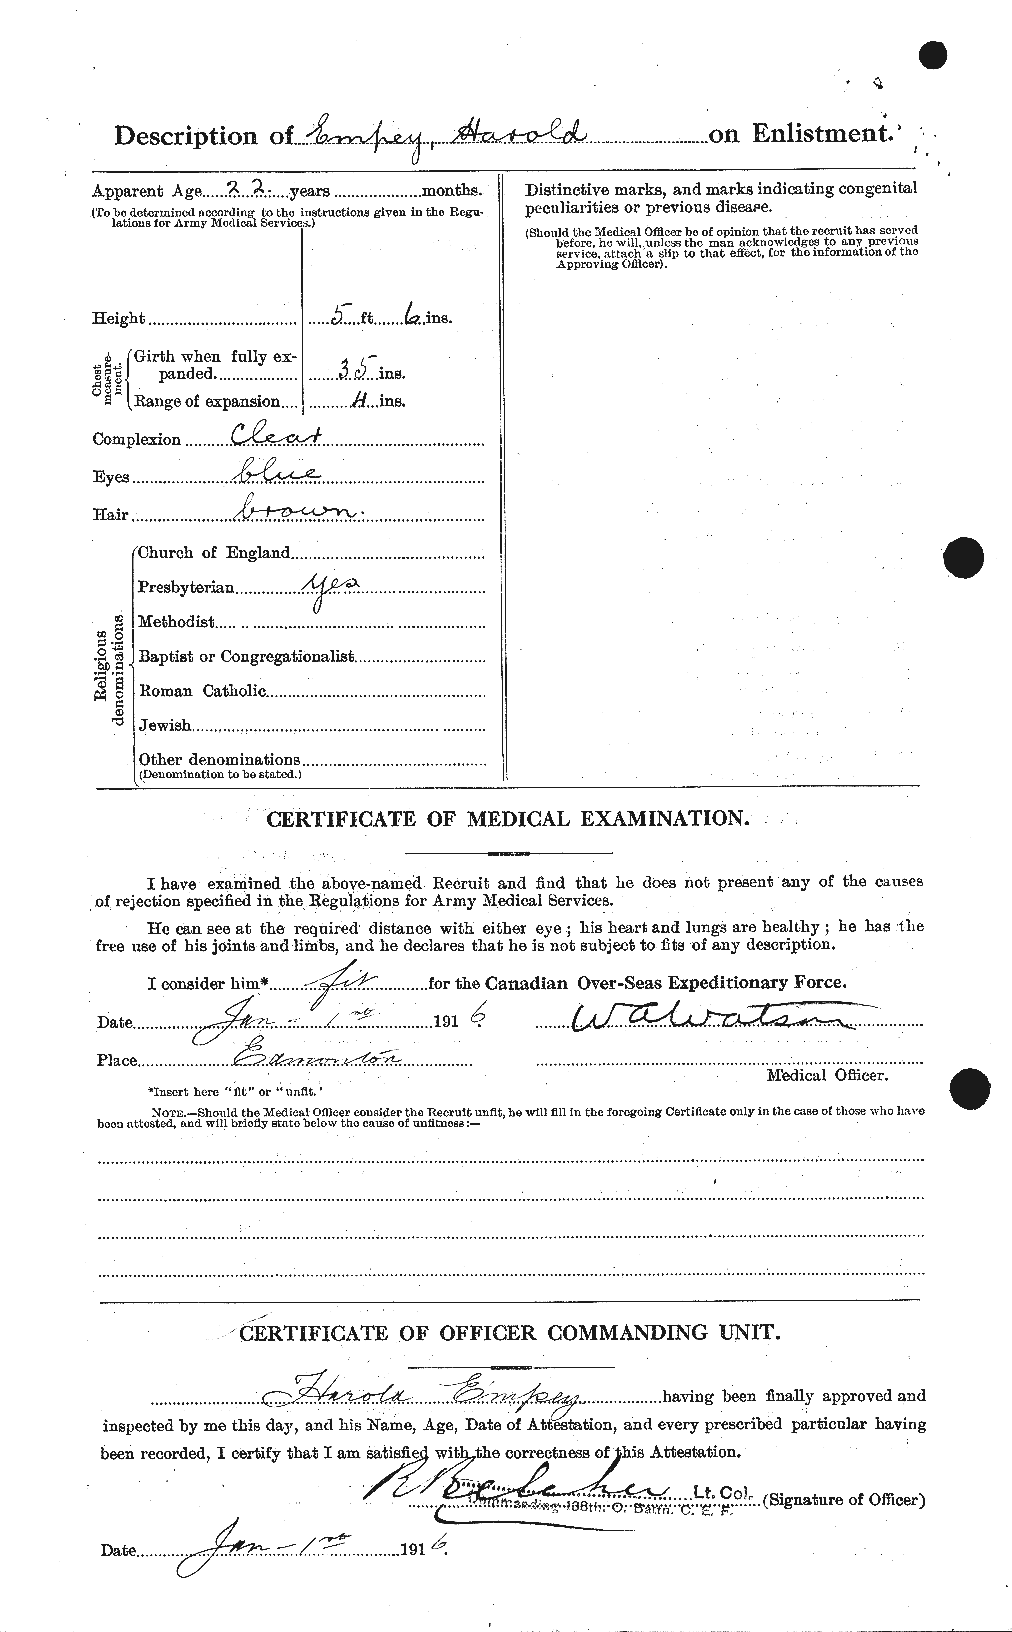 Personnel Records of the First World War - CEF 313819b